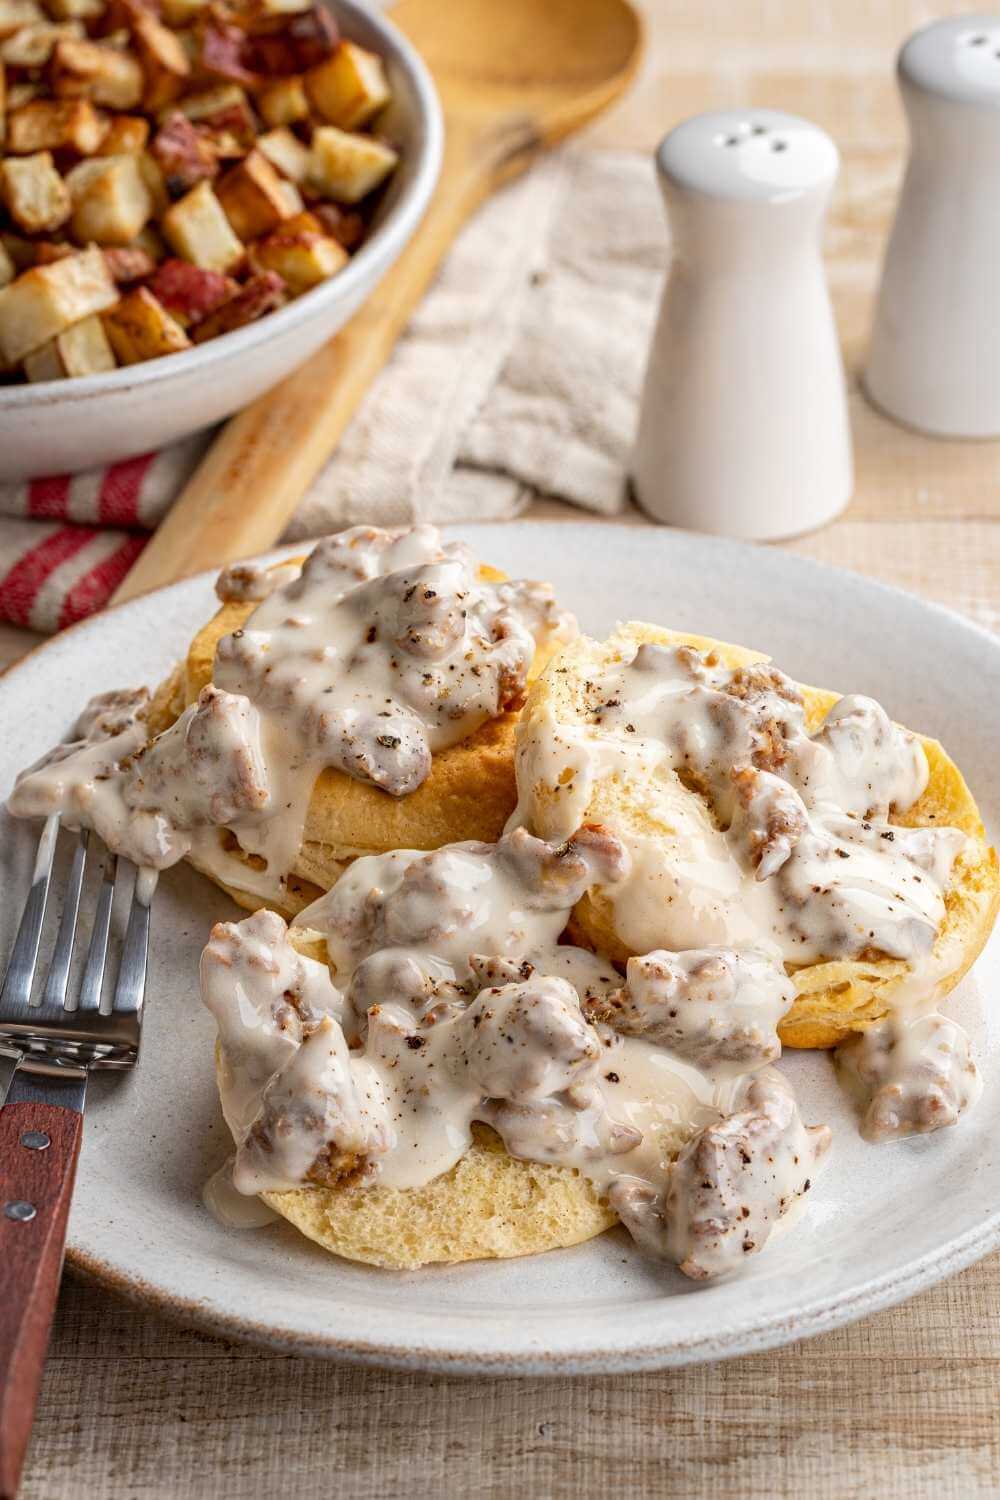 Pioneer Woman's Biscuits and Gravy